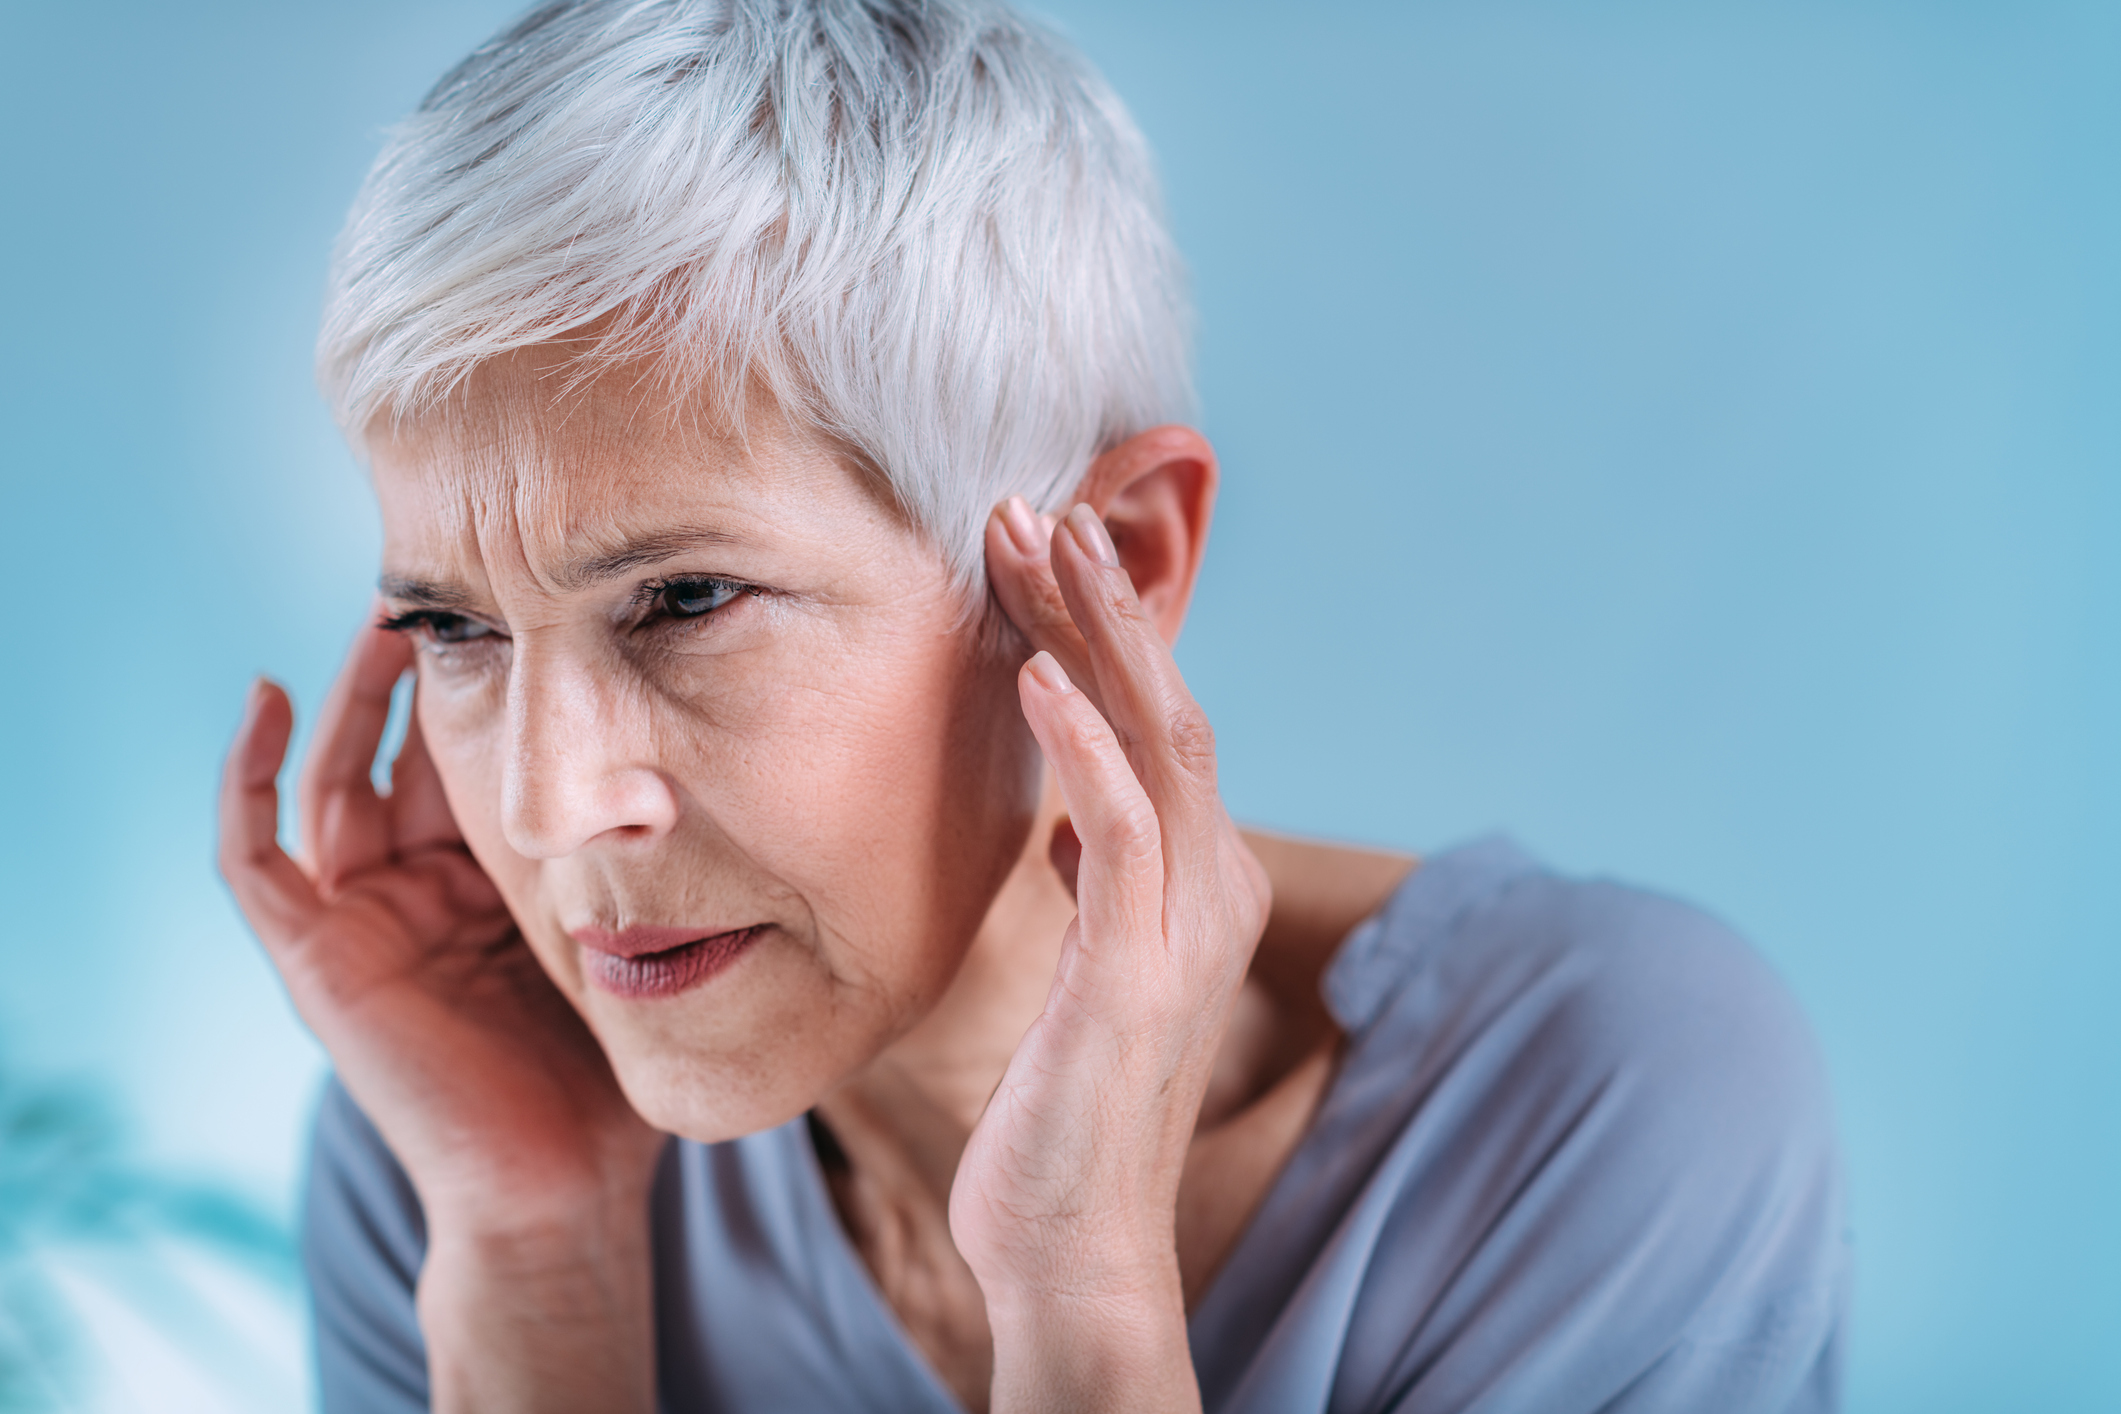 Research links common medications to tinnitus